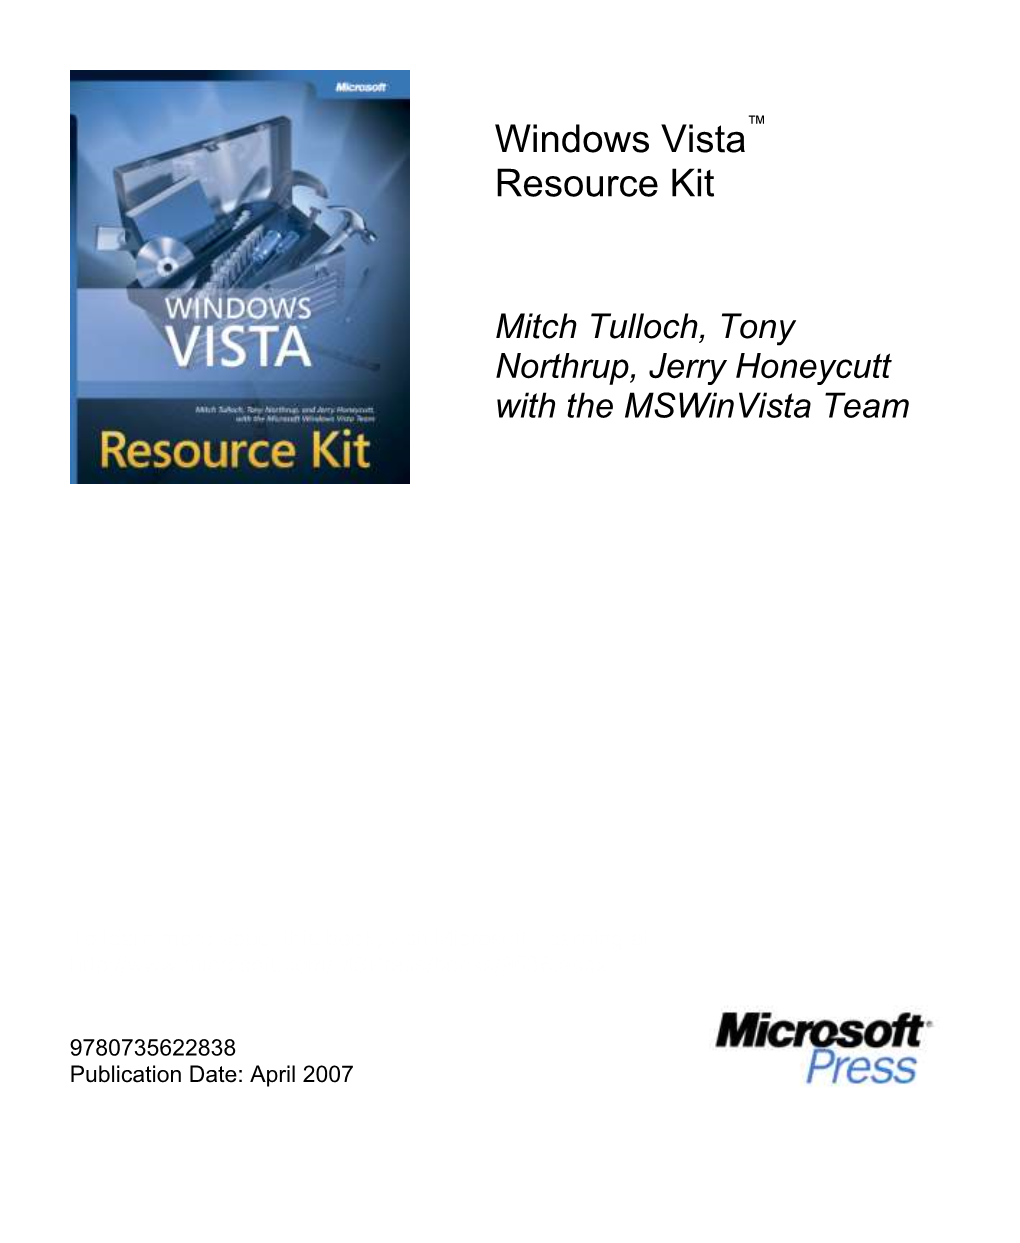 Sample Content from Windows Vista Resource